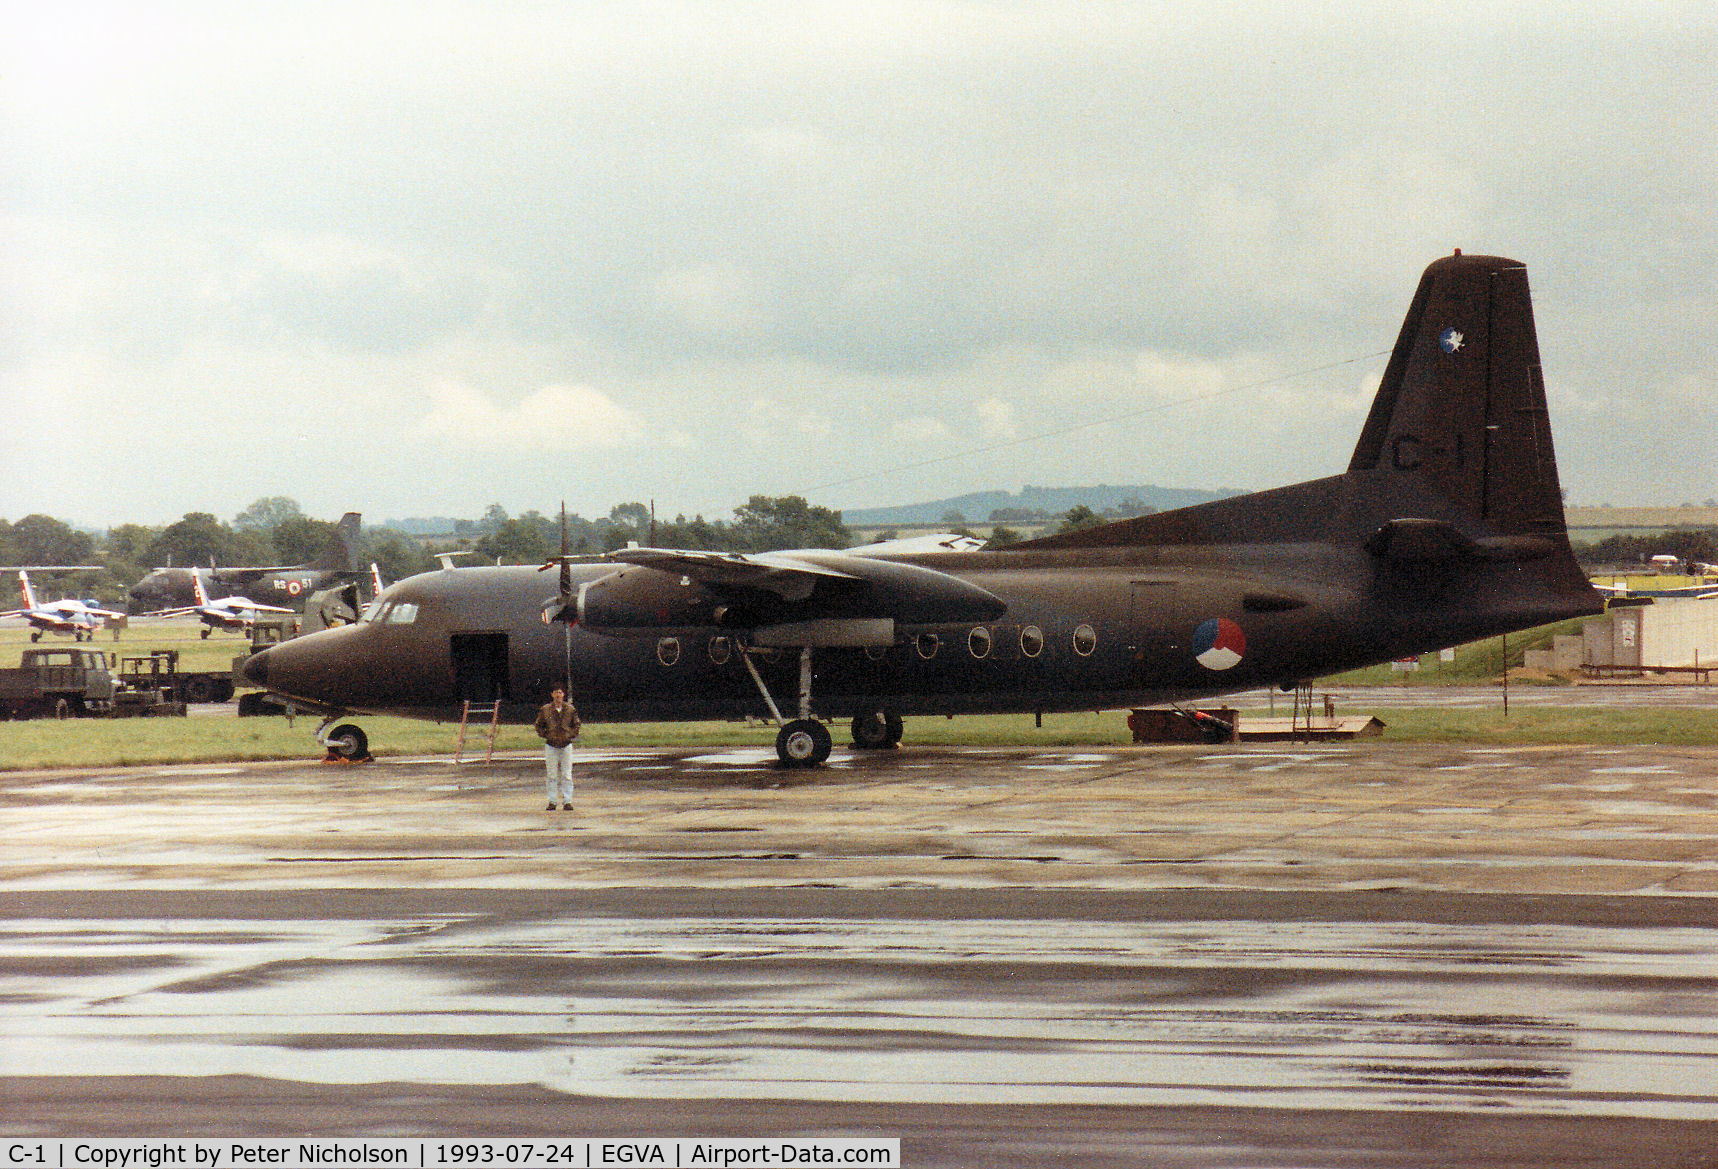 C-1, 1960 Fokker F.27-100 Friendship C/N 10152, F-27-100 Friendship, callsign Netherlands Air Force 18, of 334 Squadron on the flight-line at the 1993 Intnl Air Tattoo at RAF Fairford.